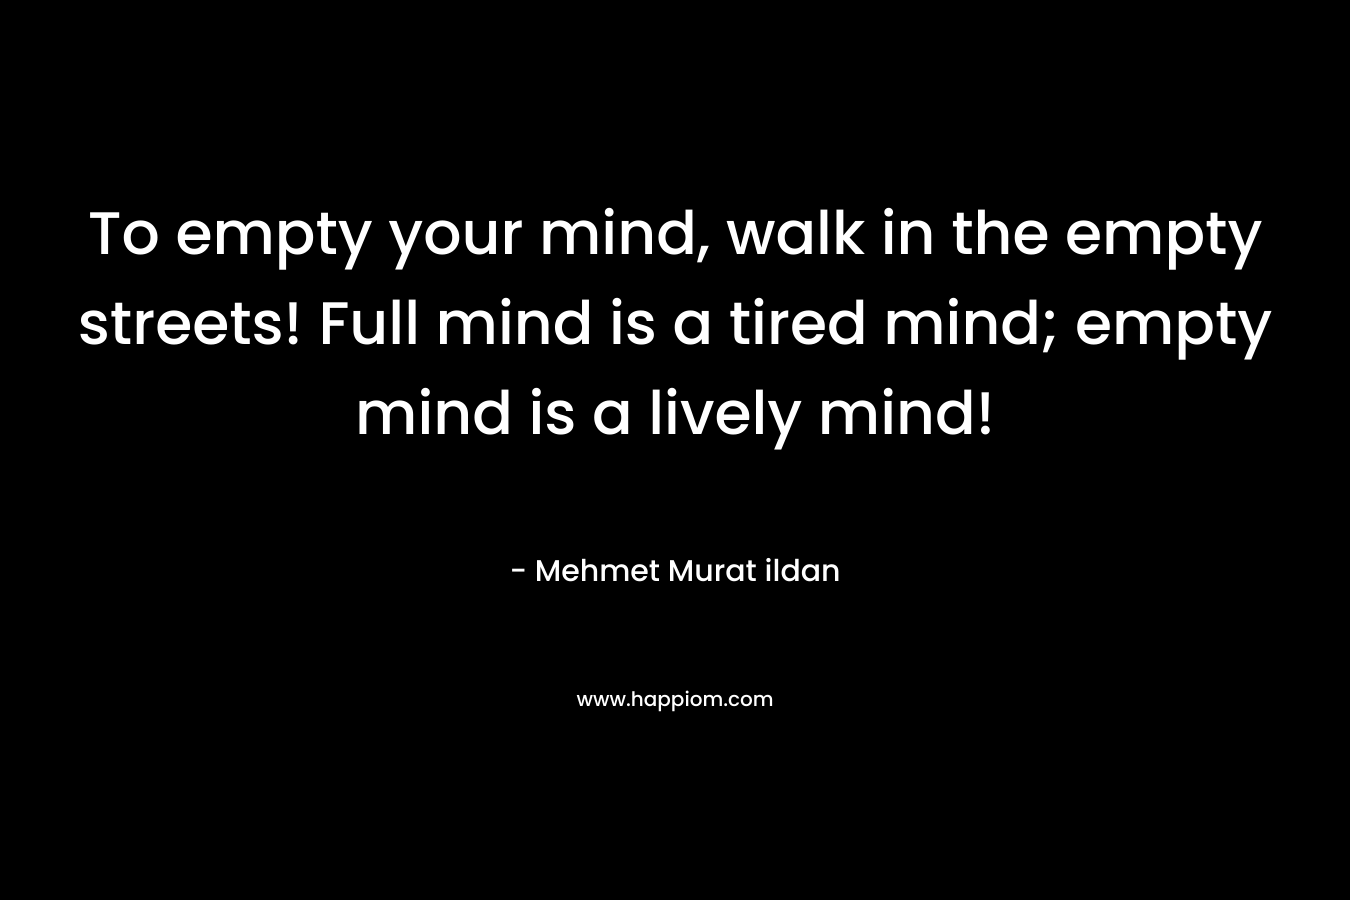 To empty your mind, walk in the empty streets! Full mind is a tired mind; empty mind is a lively mind!